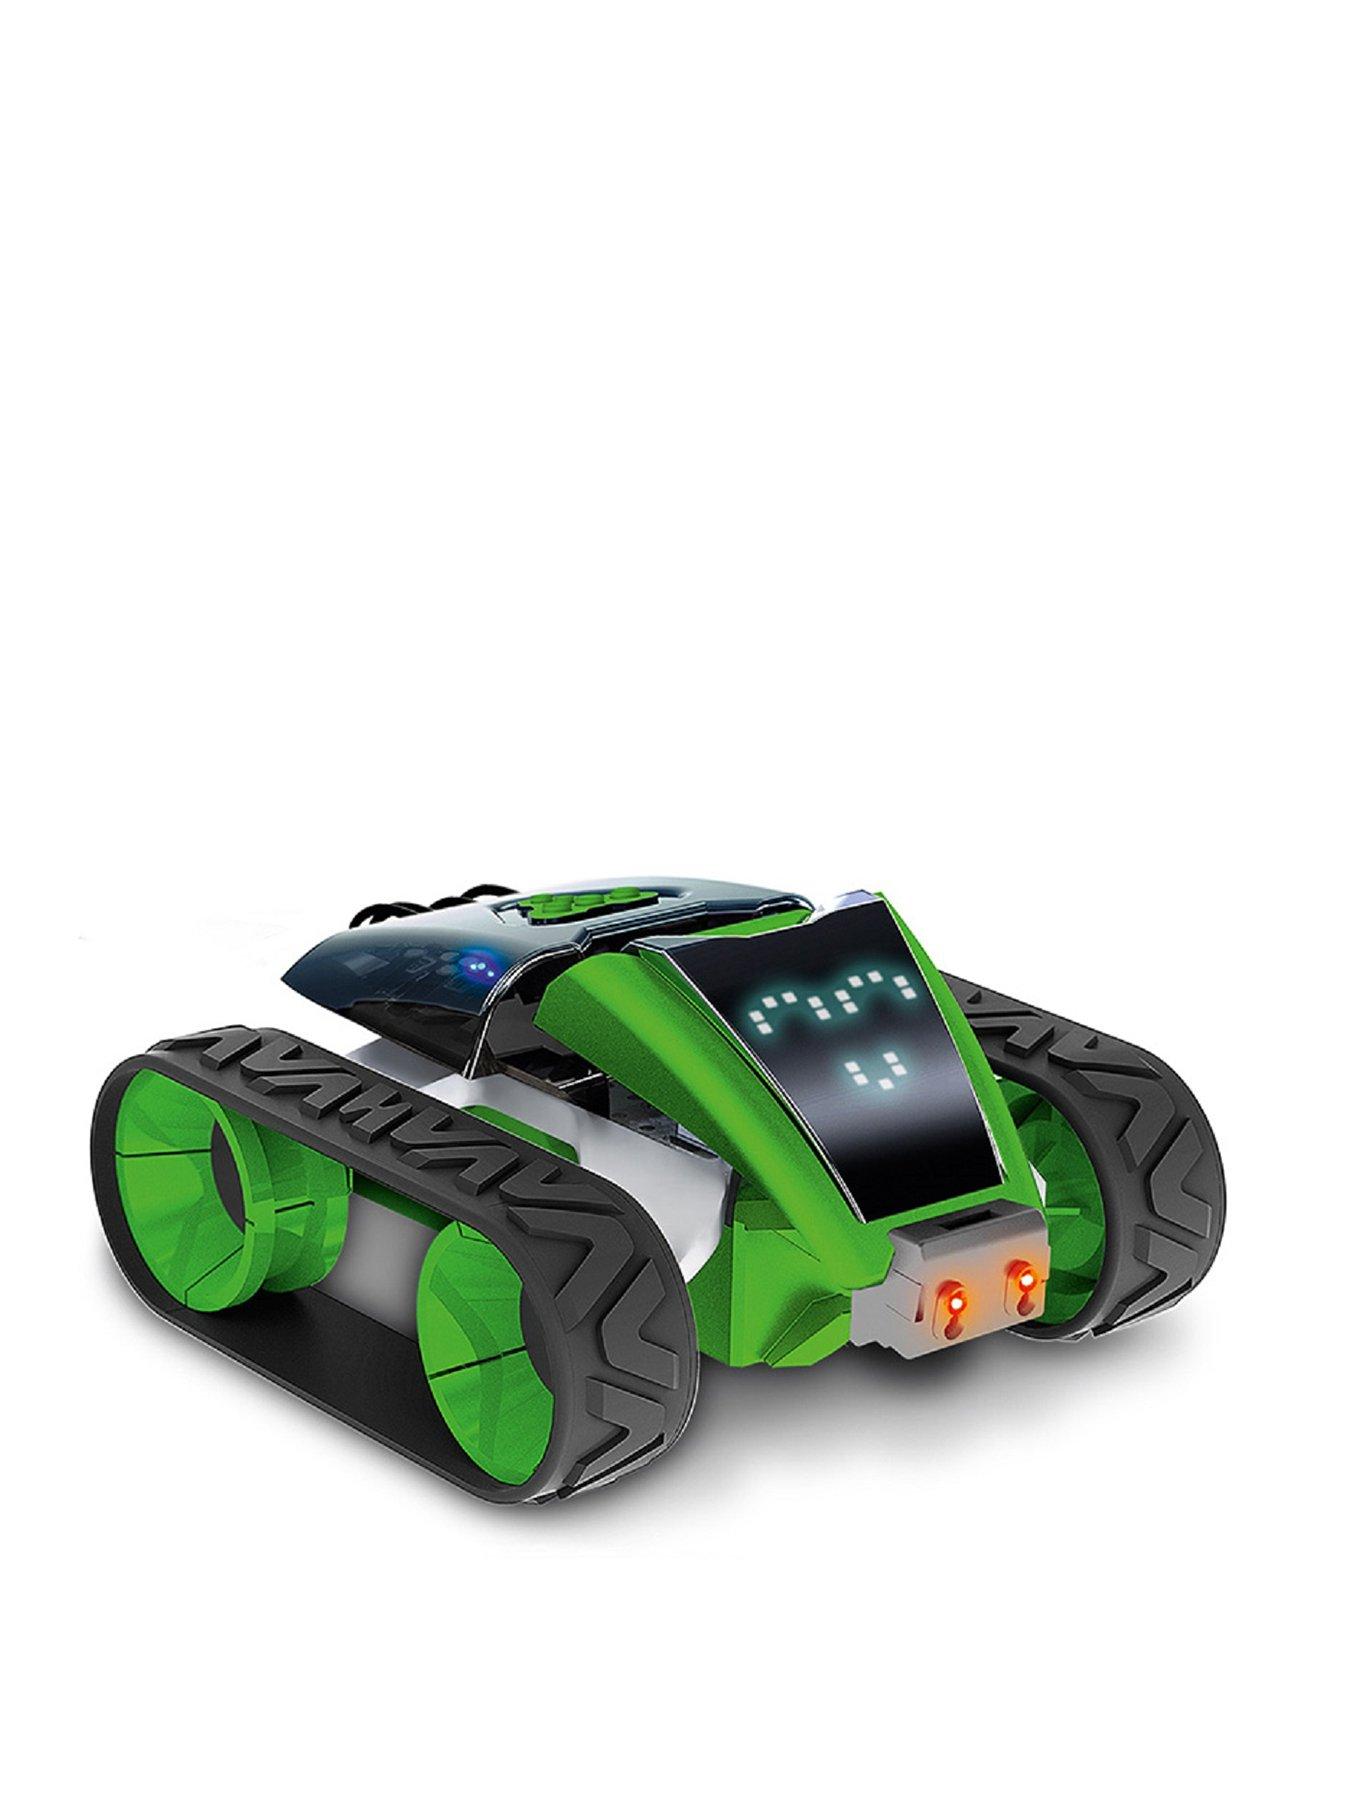 Programmable remote-controlled robots - XtremBots